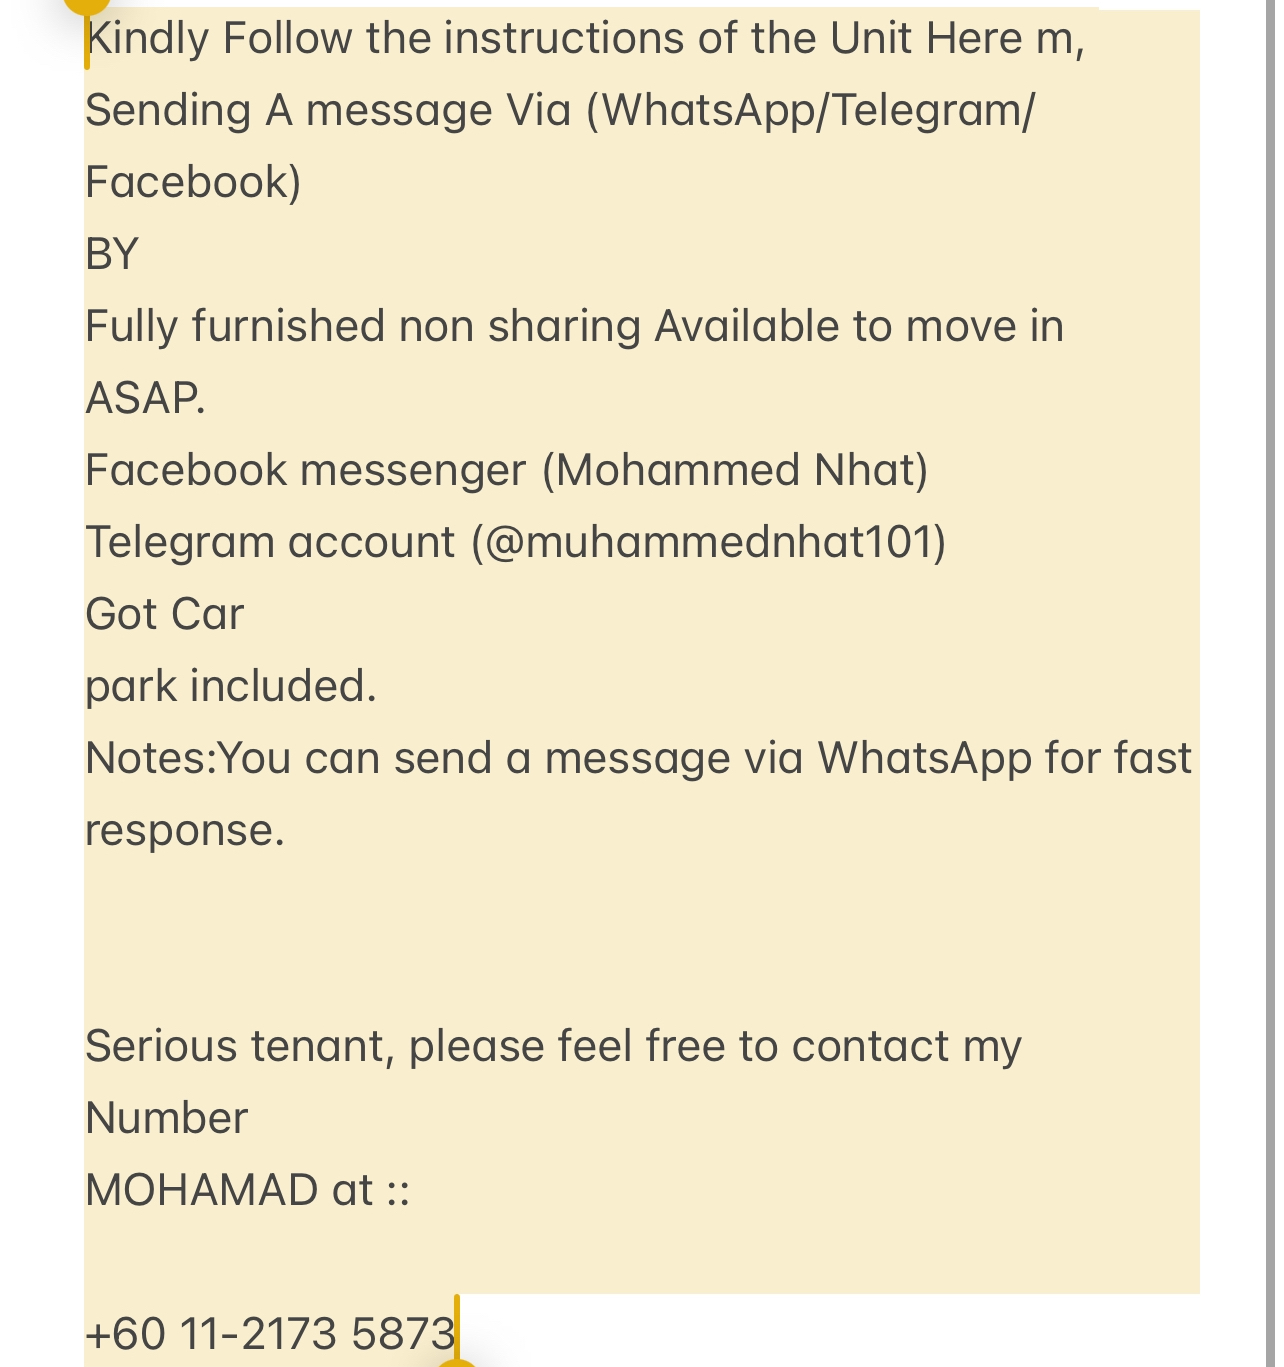 room for rent, studio, jalan seri pagi 12, Send the owner a message on WhatsApp/facebook if you want to RENT the unit facebook (Mohammed Nhat)&Telegram(@muhammednhat101) Fully furnished non sharing :(comfortable)